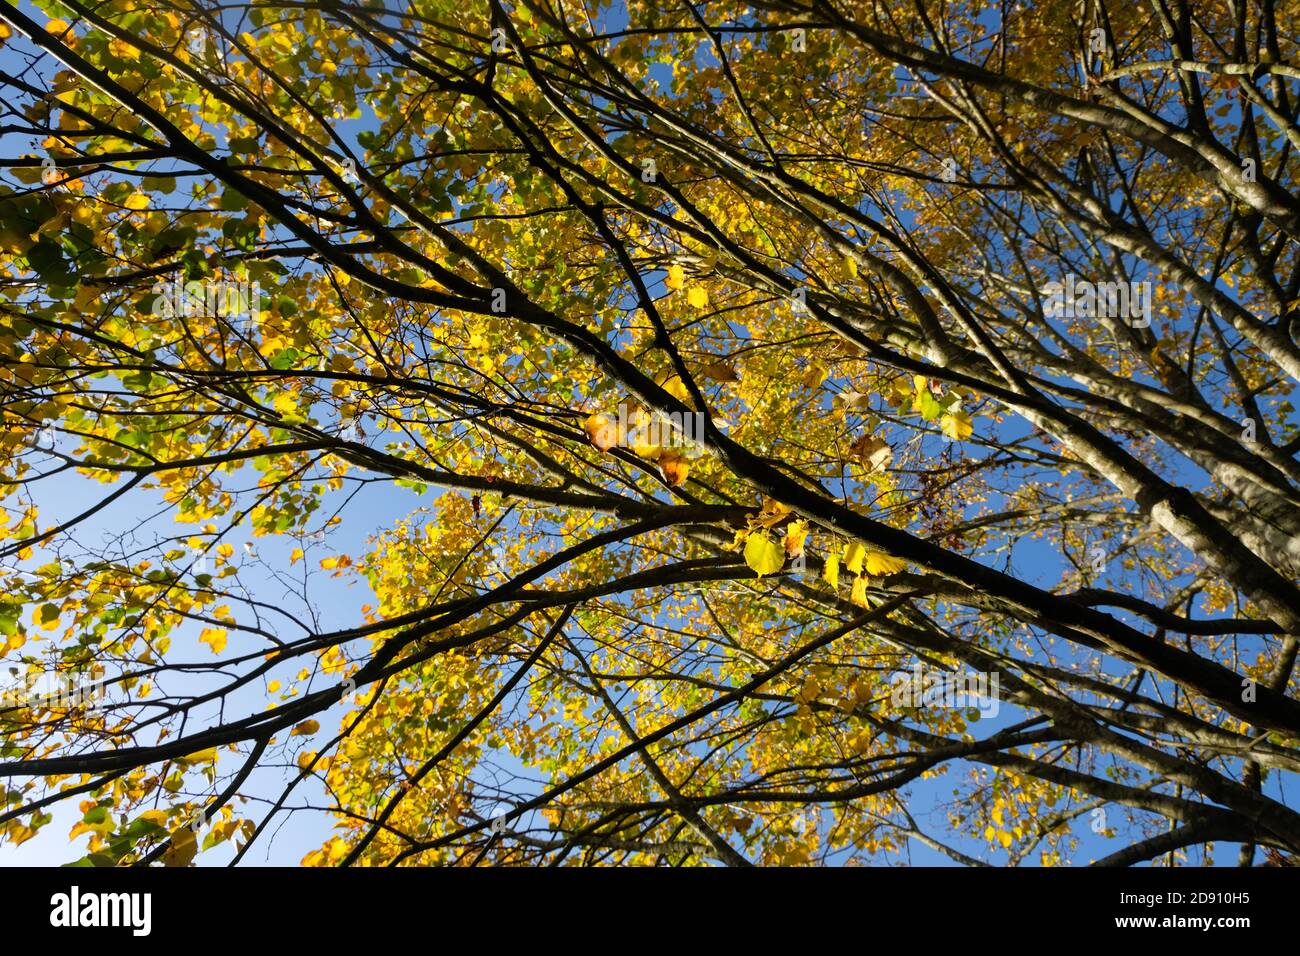 A close up shot of these lovely yellow leaves, against this bright blue sky.  Taken on a sunny autumn morning walk. Stock Photo